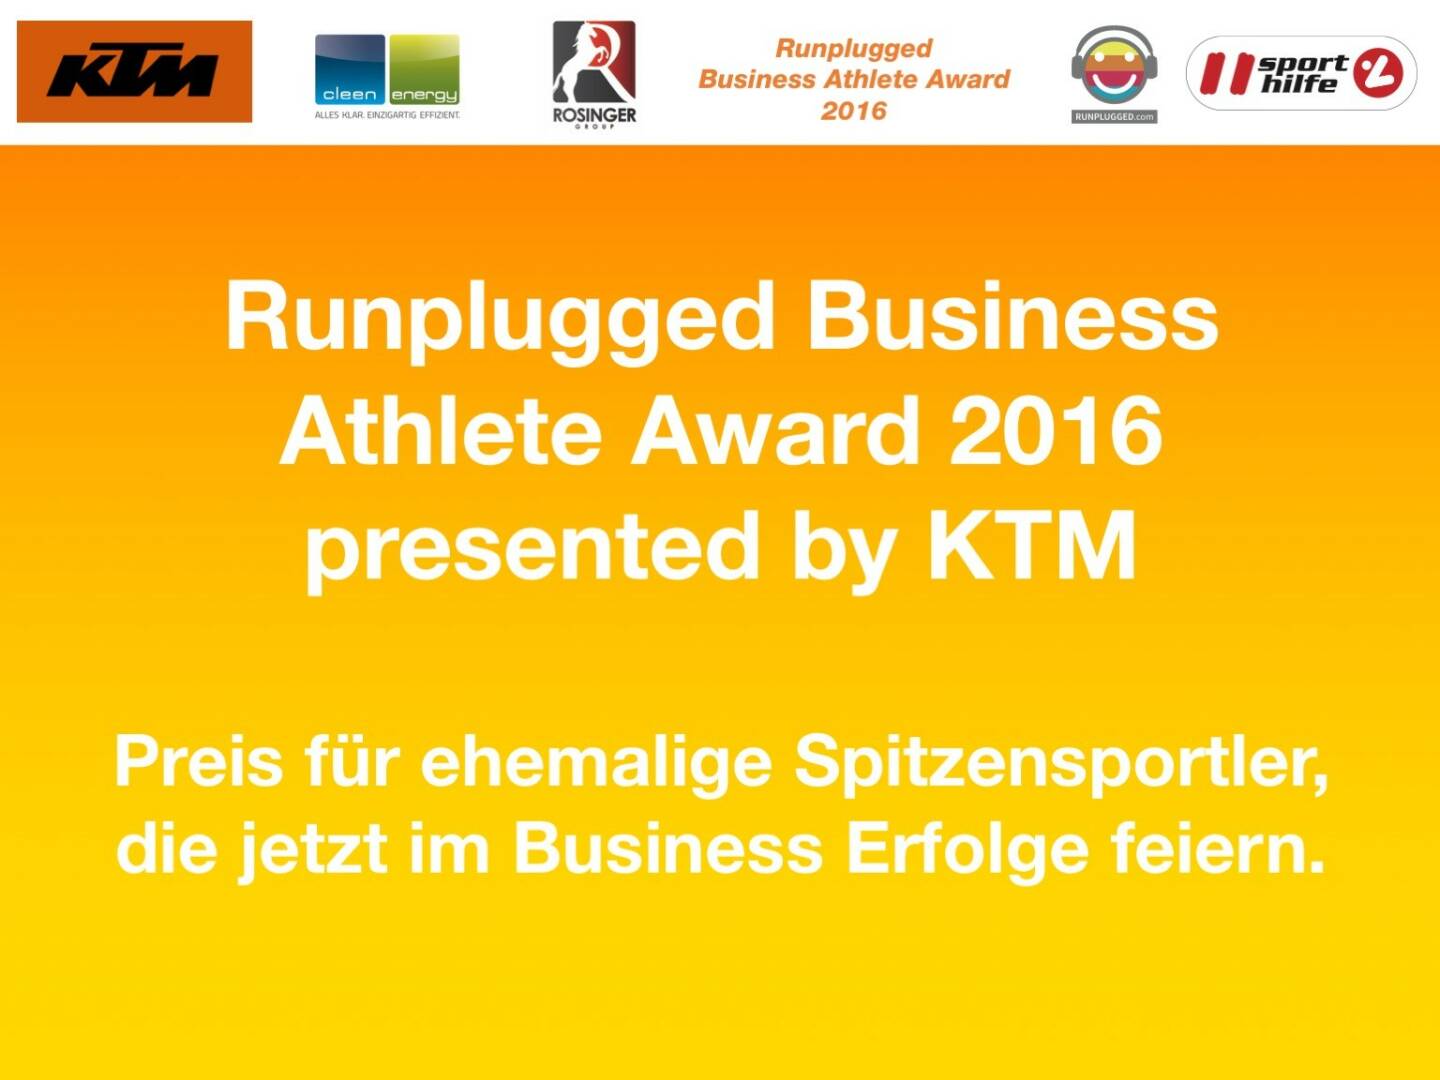 Business Athelete Award 2016 presented by KTM